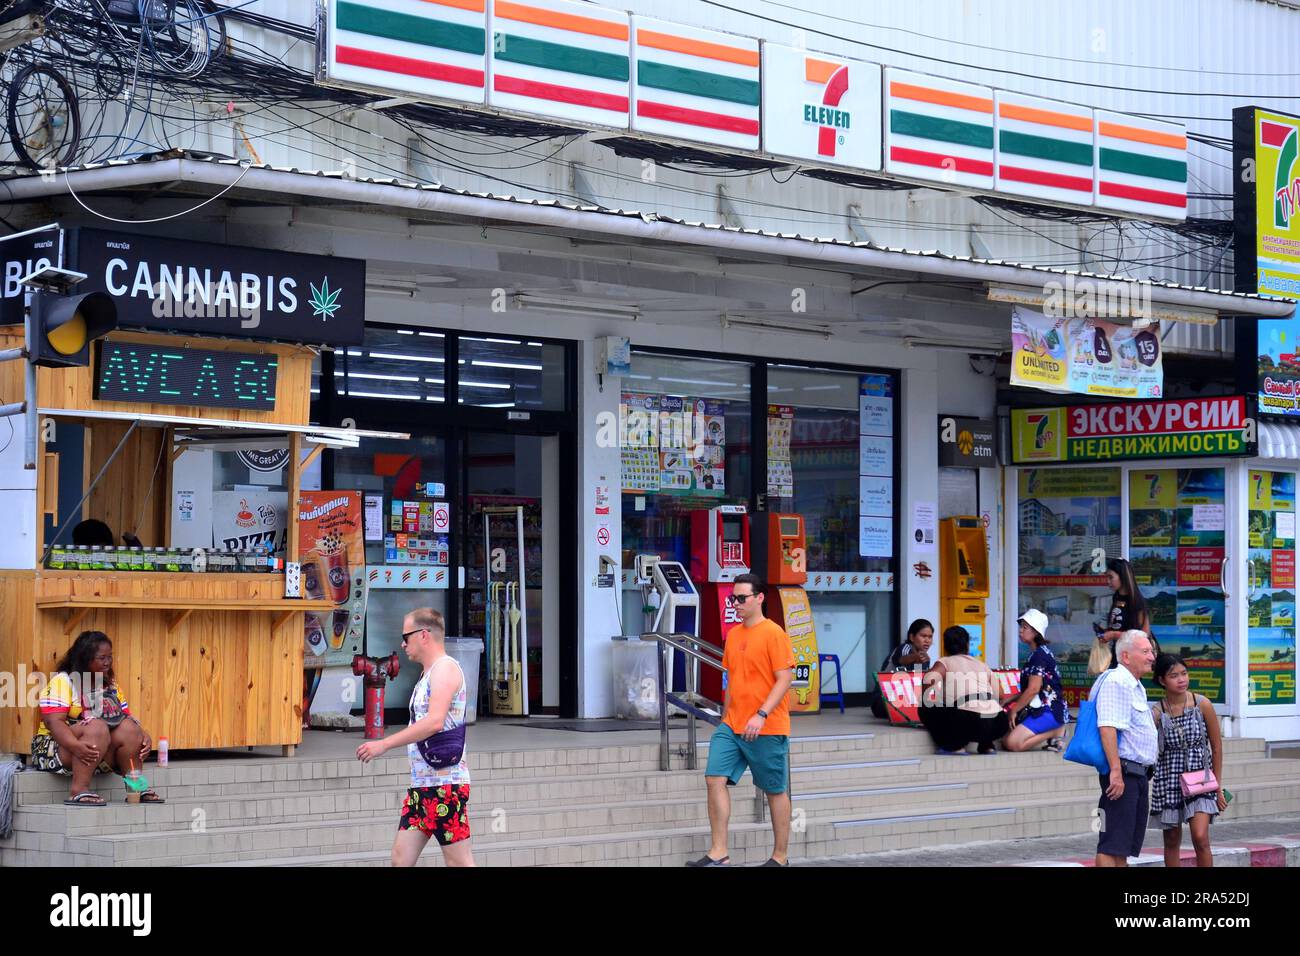 Frontage of a 7/11 grocery shop with a cabin selling cannabis in front of it in Jomtien, Pattaya, Thailand.  In 2022 Thailand delisted cannabis as a narcotic; many shops have sprung up to sell it. In January, 2023, the Ministry of Public Health issued a guide: “10 Things Tourists Need to Know about Cannabis in Thailand”. Thailand hopes, by this initiative, to promote medical use of marijuana and create economic opportunities for local people. Stock Photo